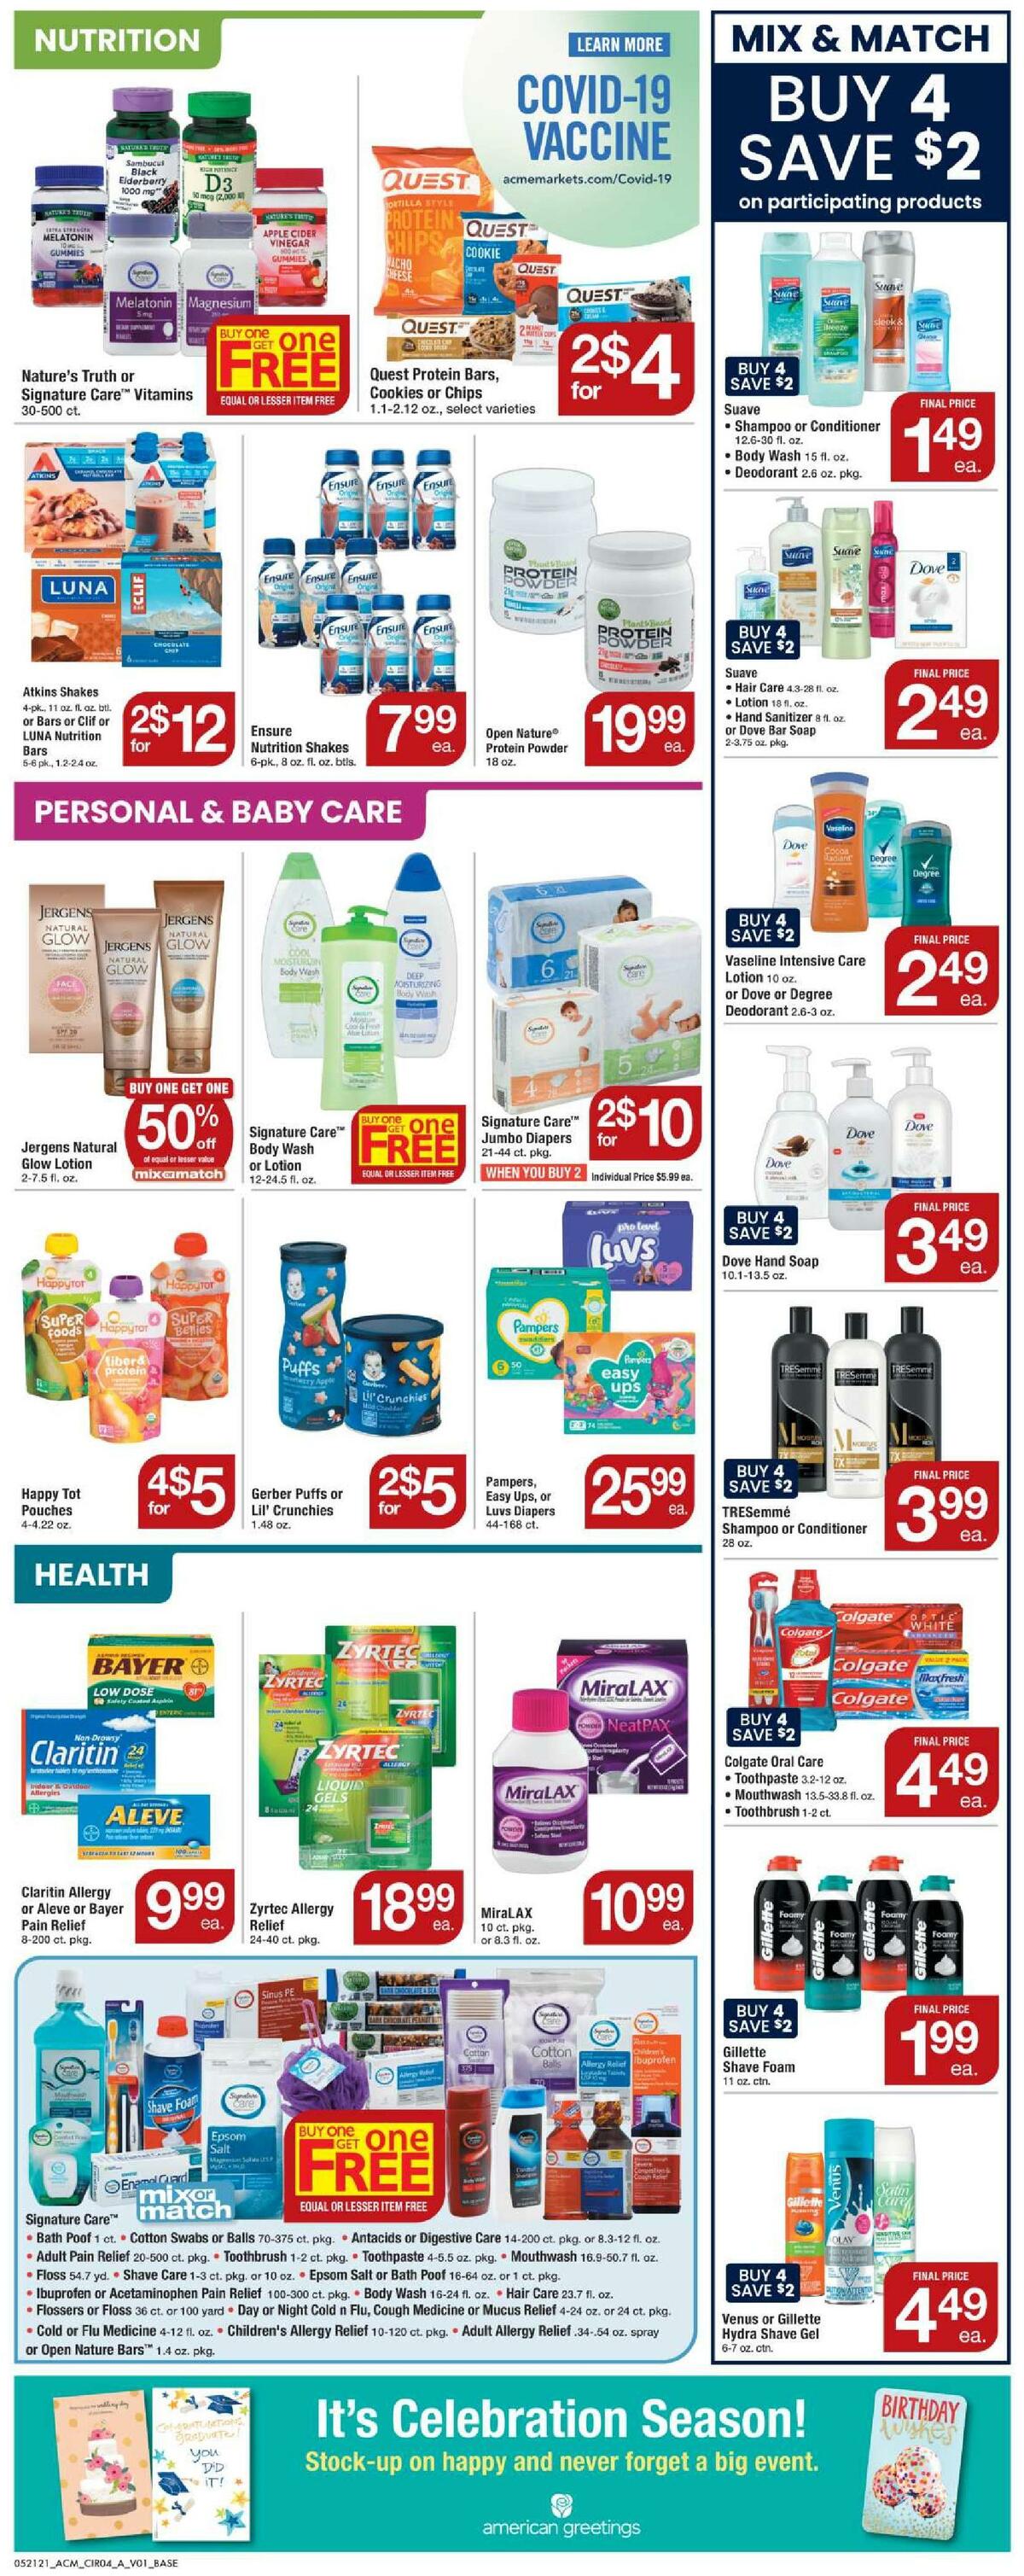 ACME Markets Weekly Ad from May 21